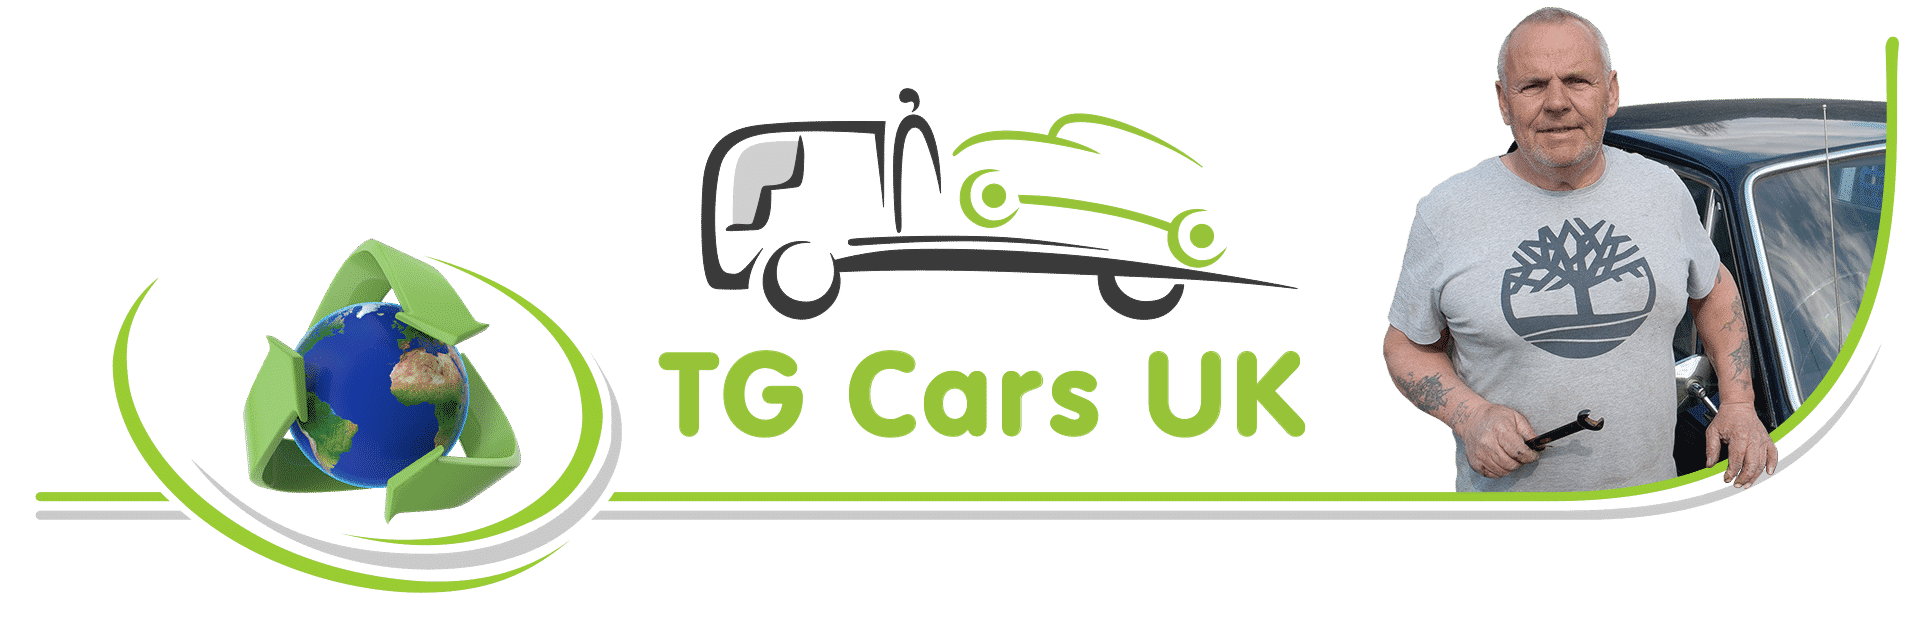 cash for scrap cars to recycle by Terry